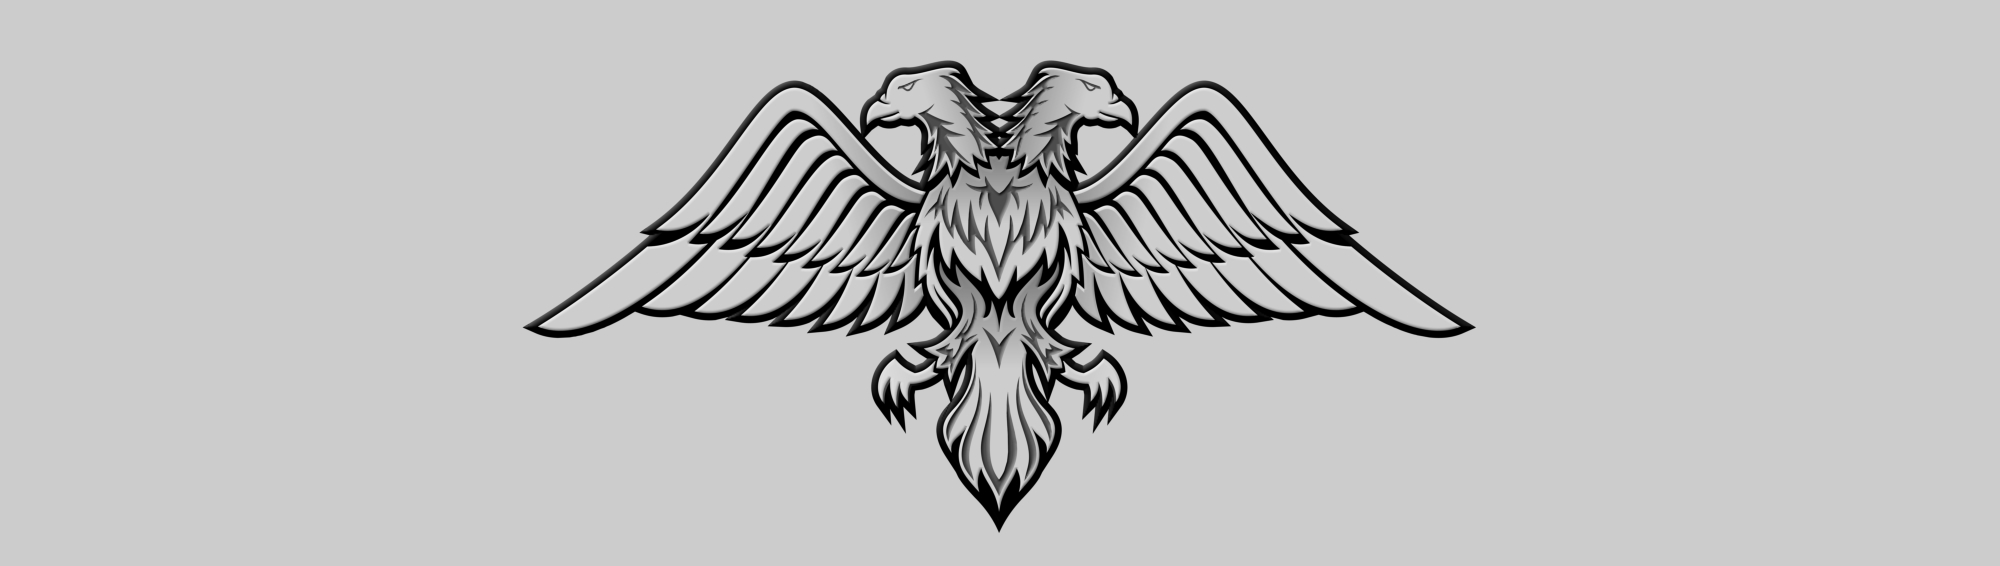 Gray Eagle with two Heads